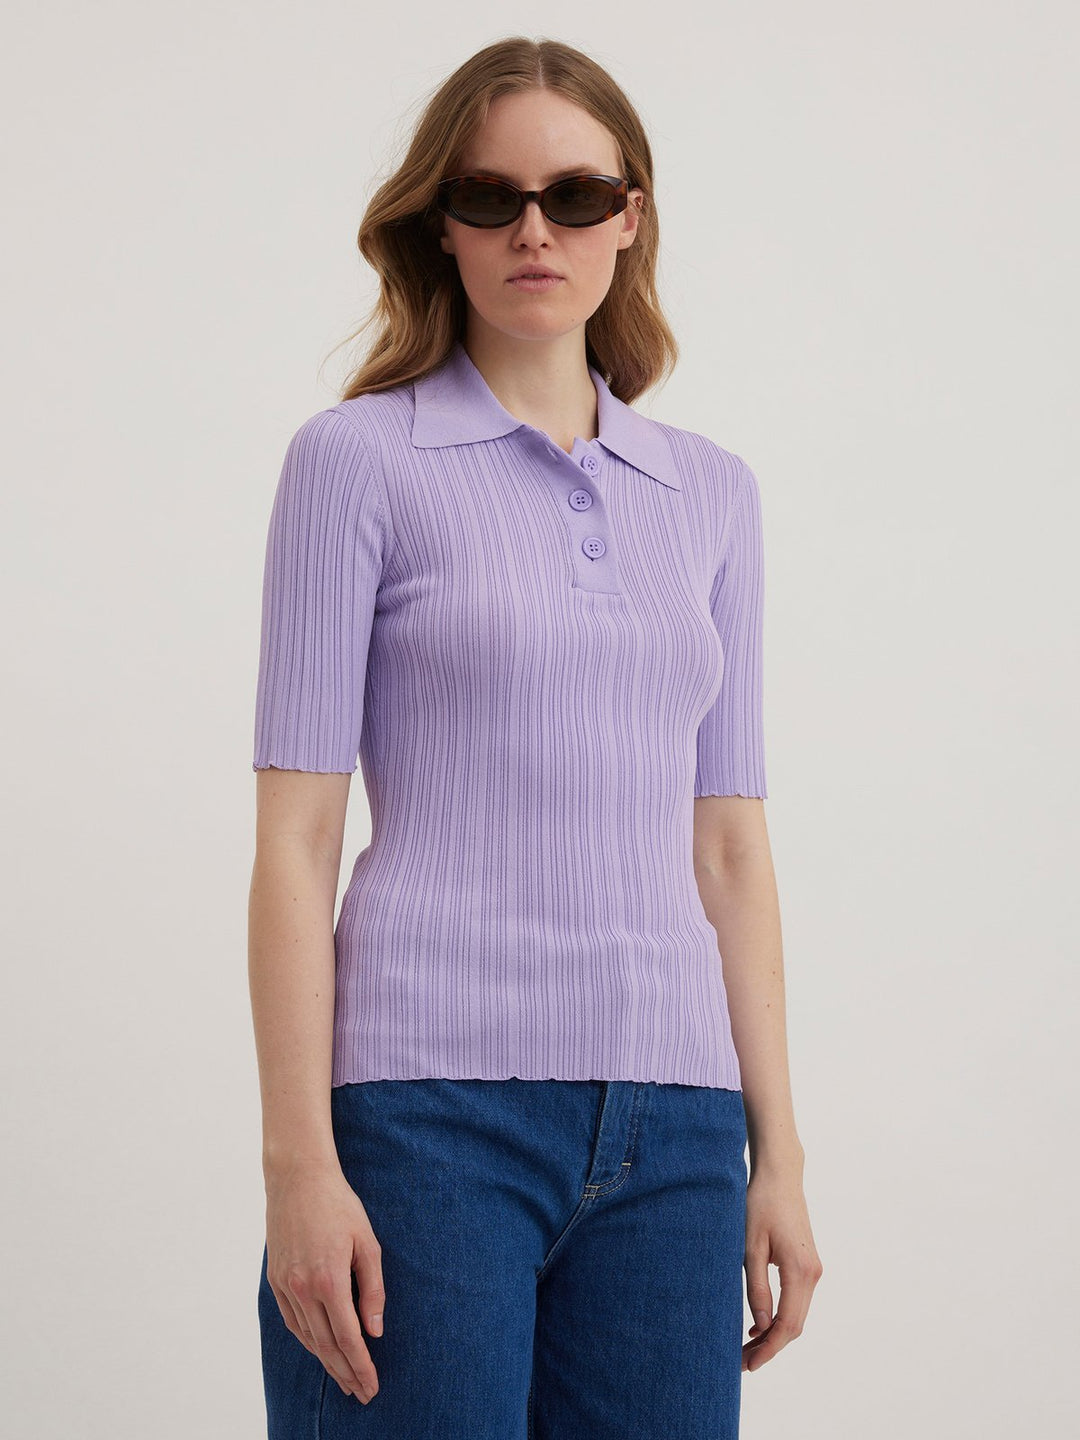 SMOOTH KNIT TOP  Lilac